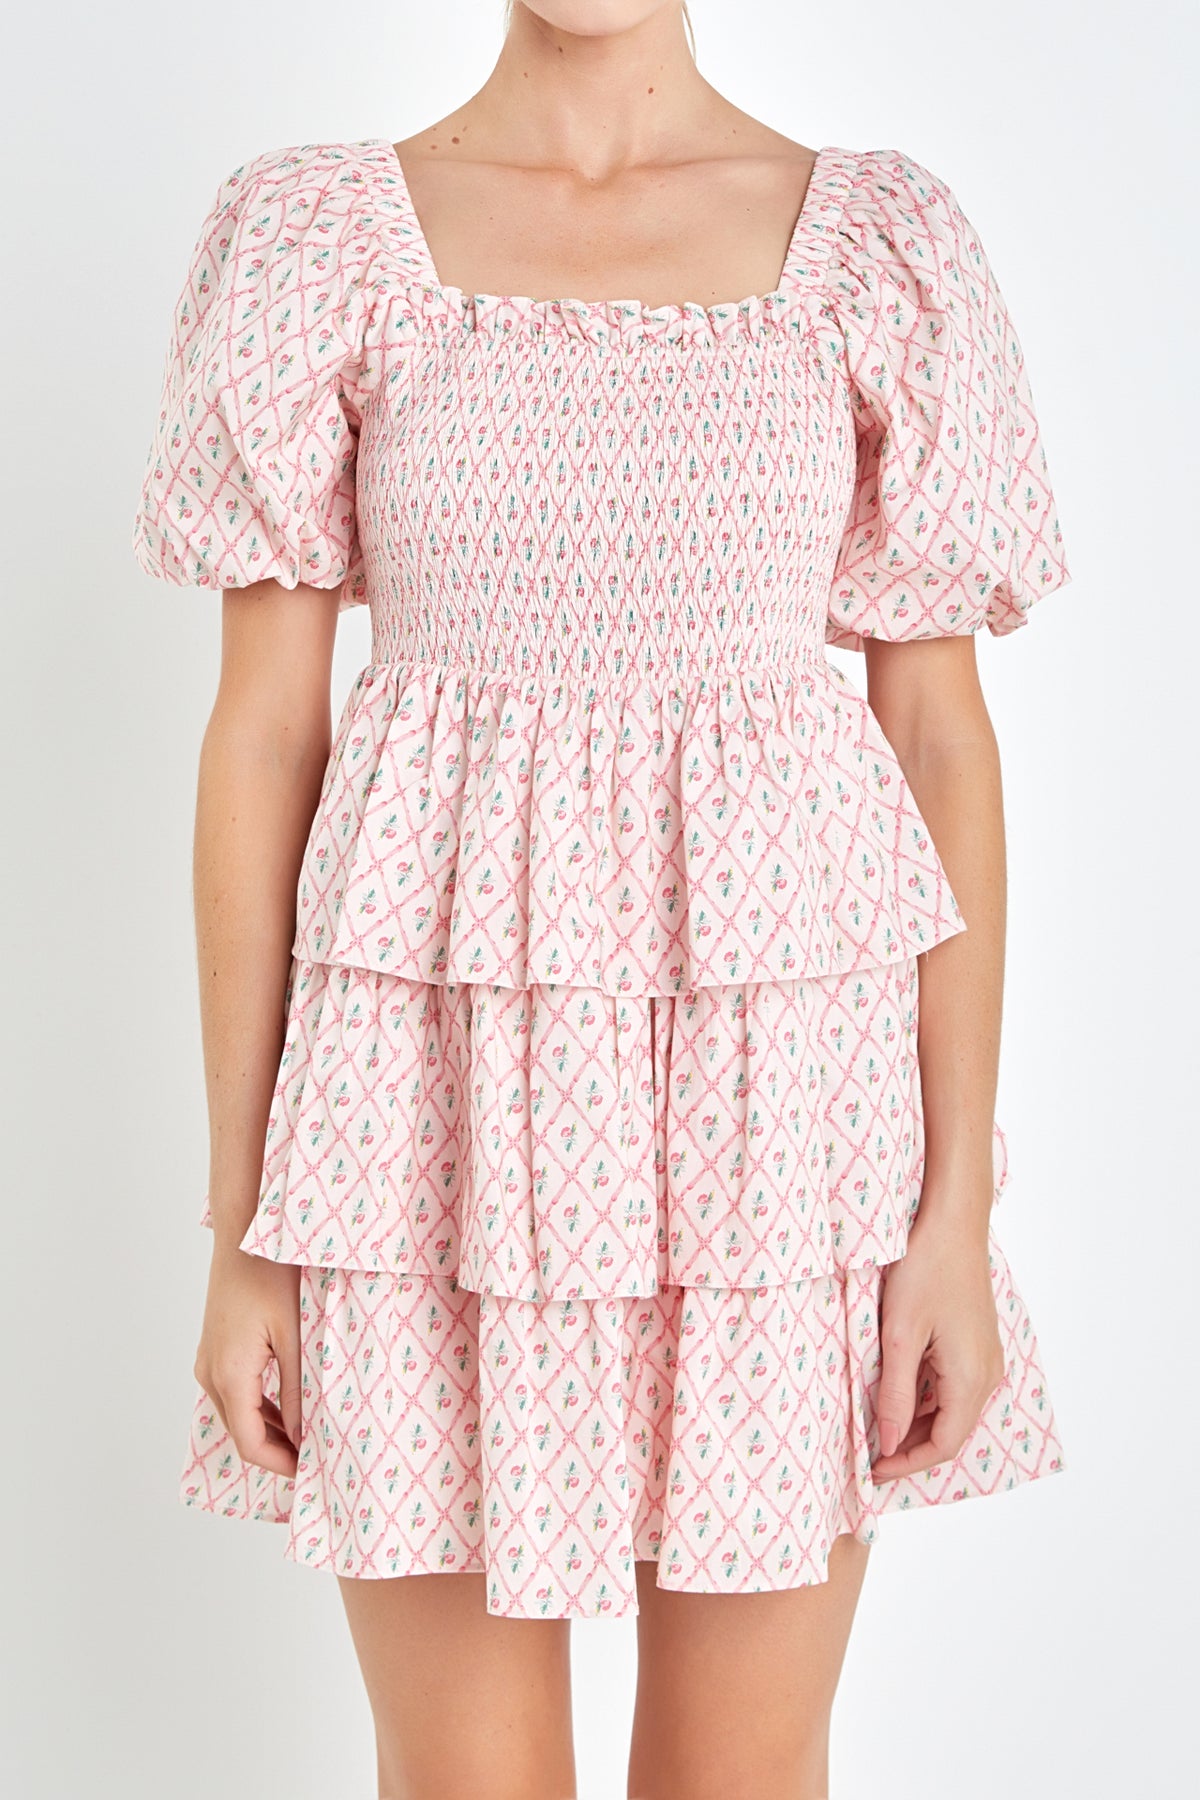 Forever's Not Enough Floral Ruffle Cut-Out Dress - Lt. Pink – Adorabelles